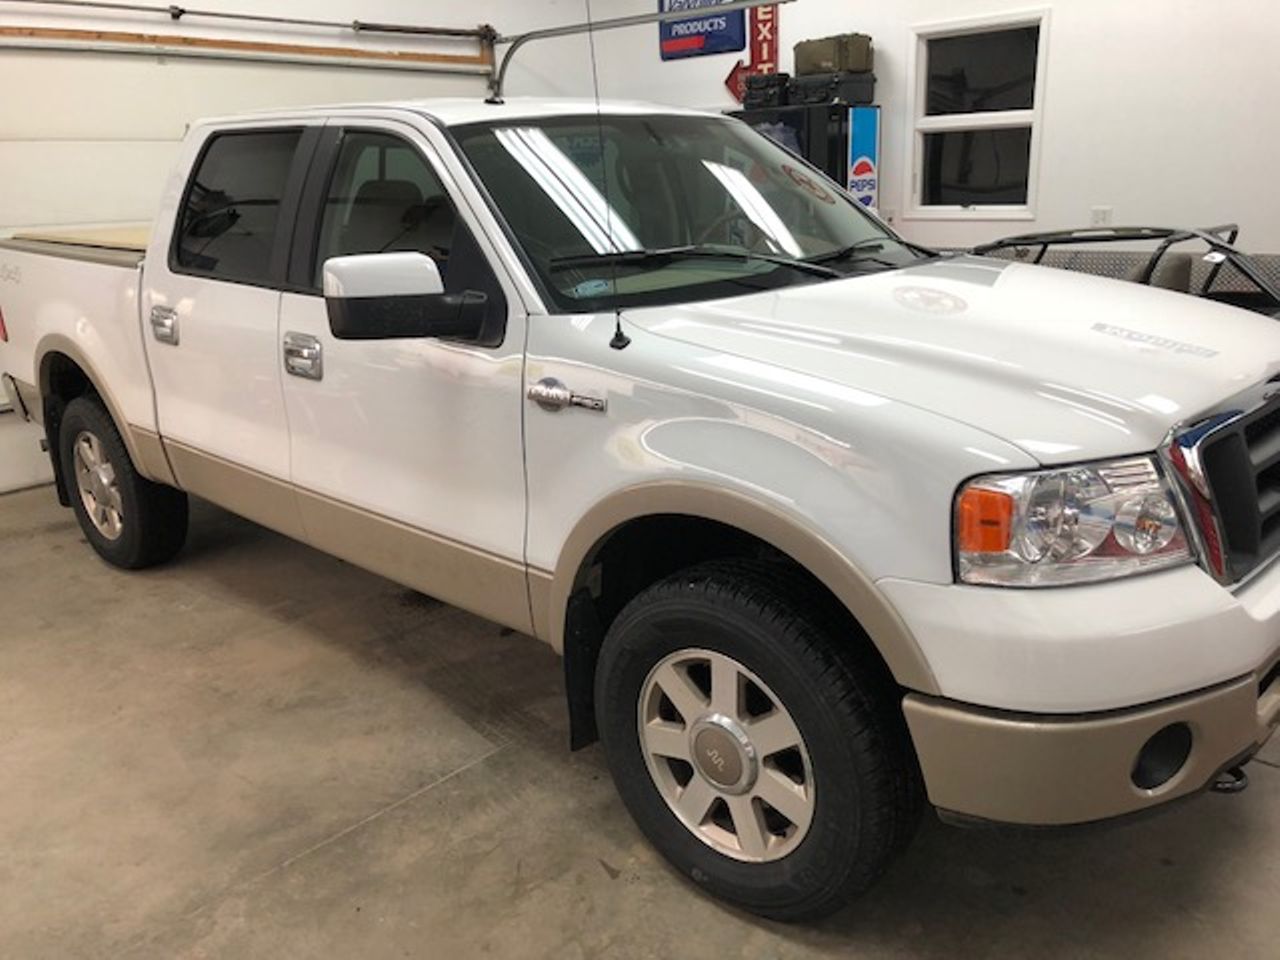 2007 Ford F-150 King Ranch | Sioux Falls, SD, Oxford White Clearcoat/Pueblo Gold Clearcoat Metallic (White), 4x4